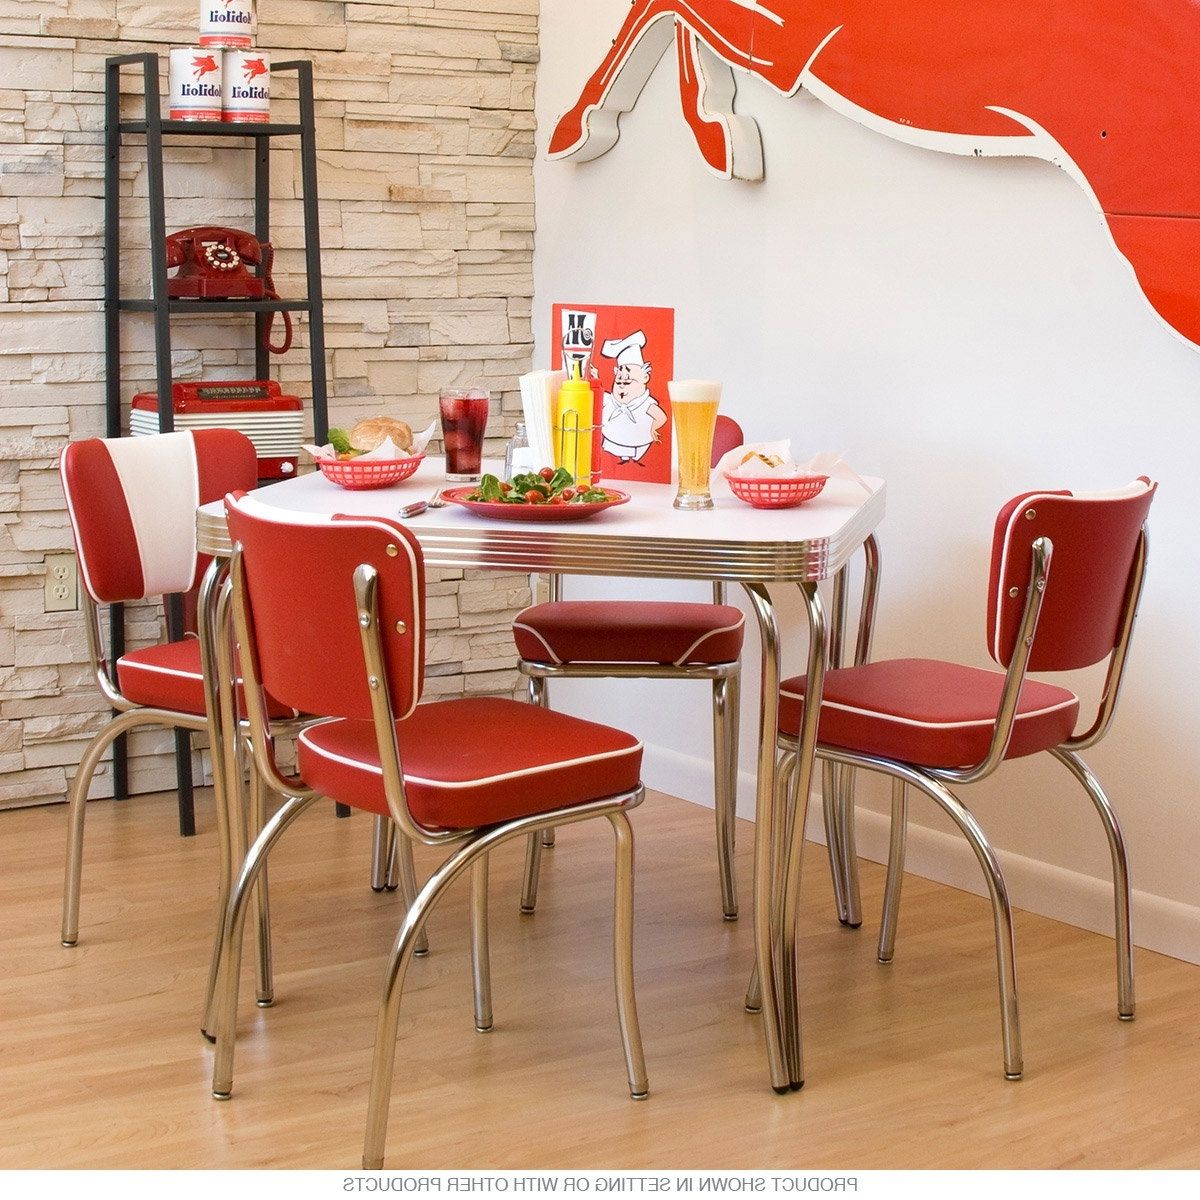 Retro Dining Tables Throughout Best And Newest Dinette Set Square Table With 4 Chairs At Retro Planet (View 3 of 25)